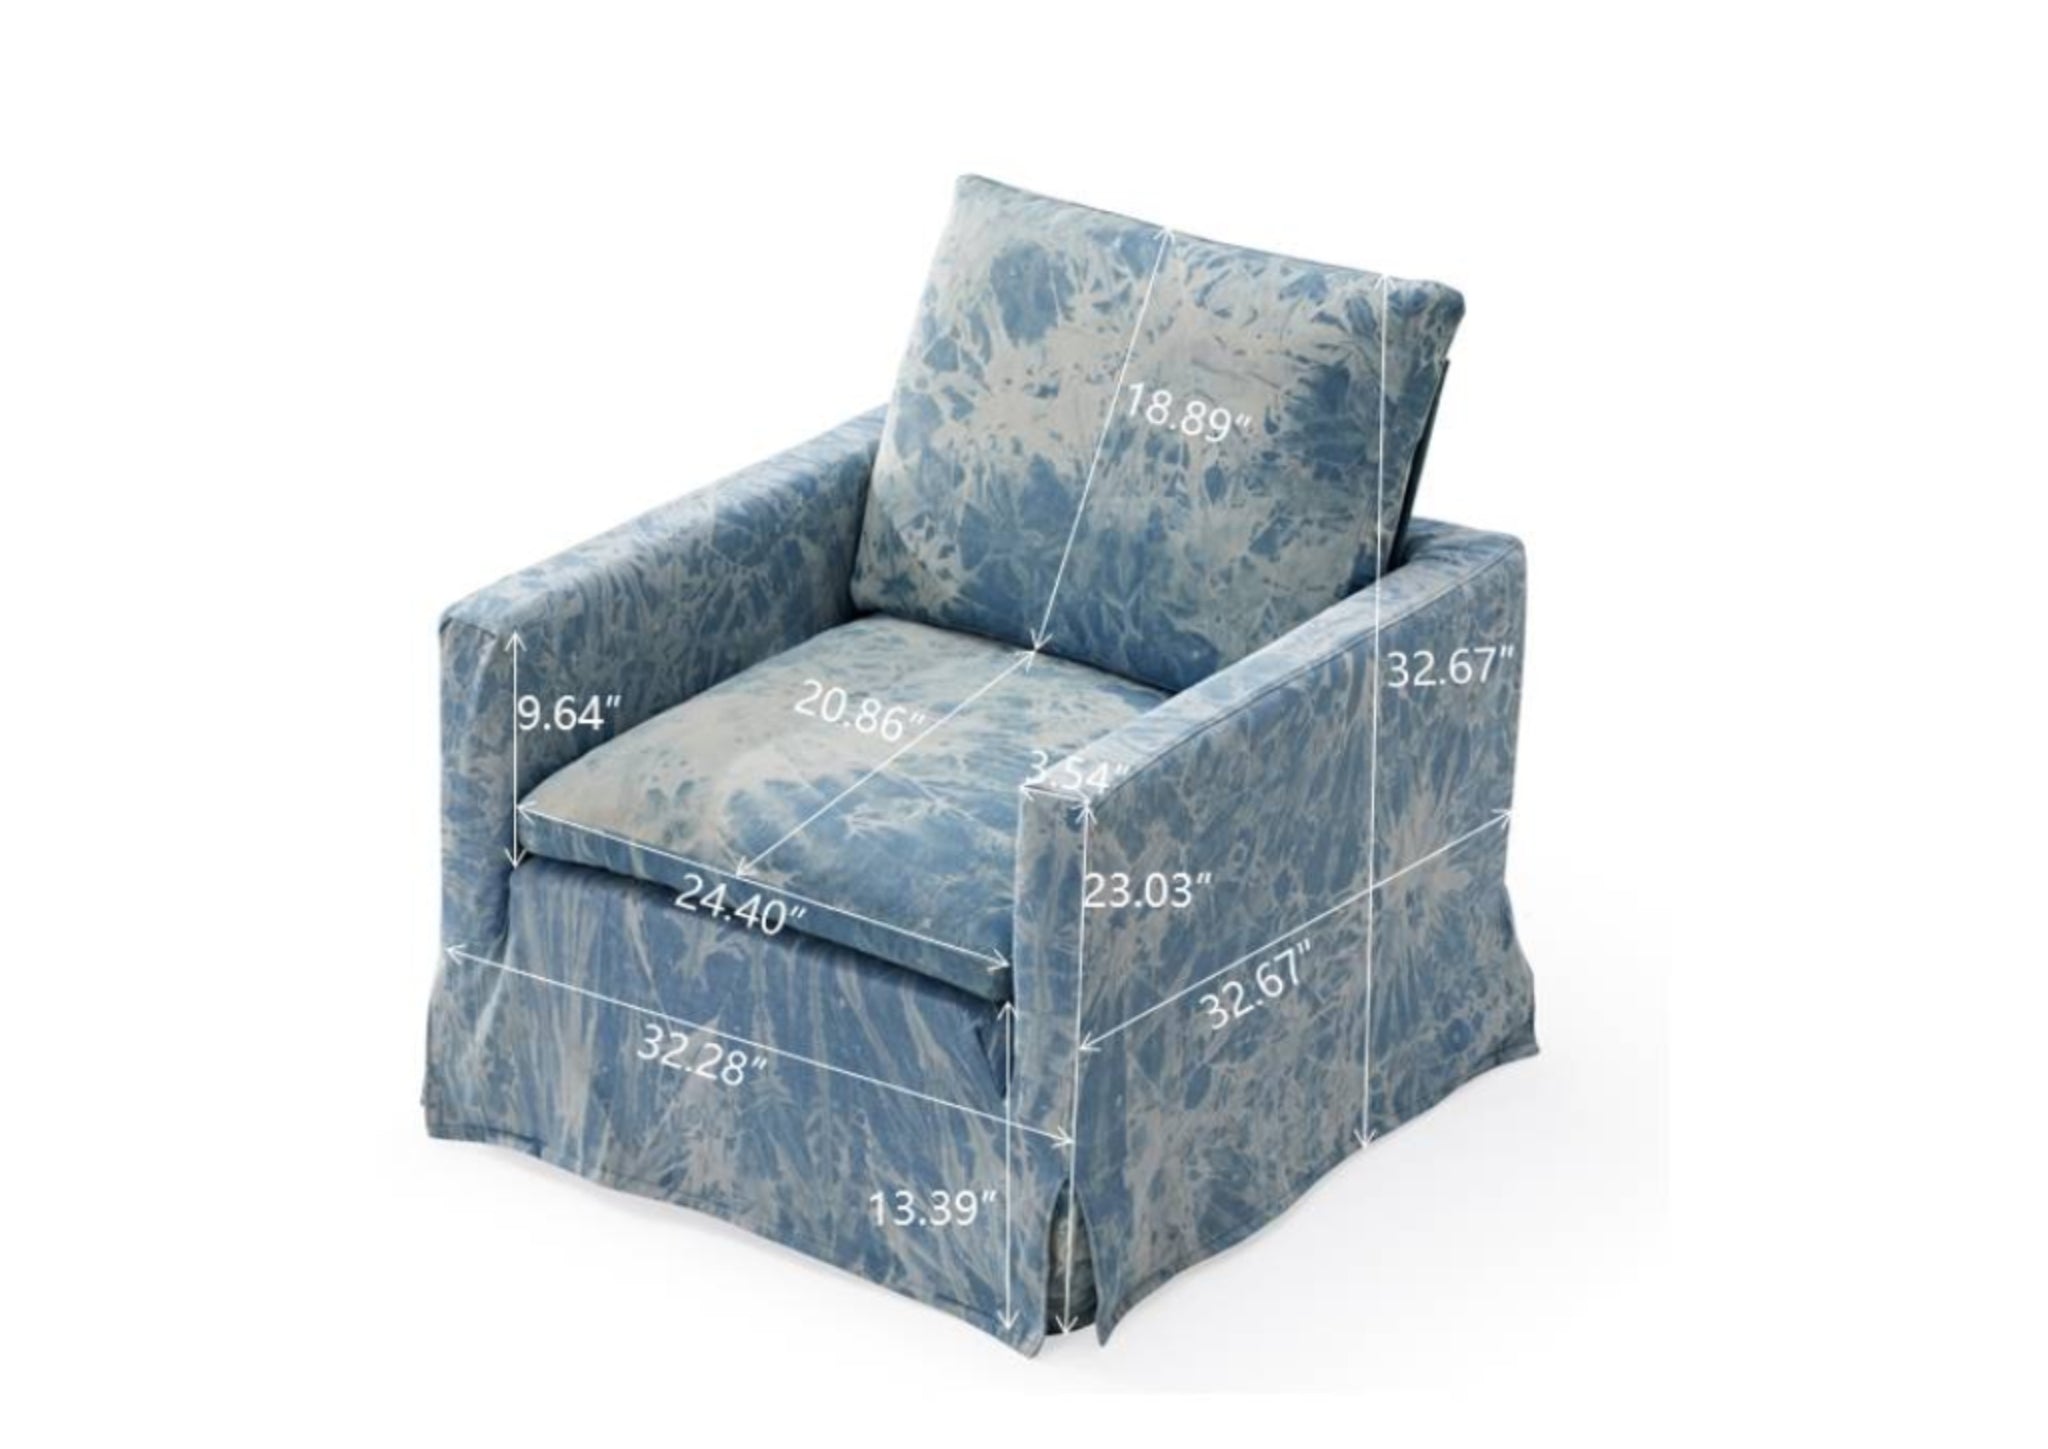 Swivel Chair with Loose Cover, Denim Fabric,Solid blue+grey-primary living